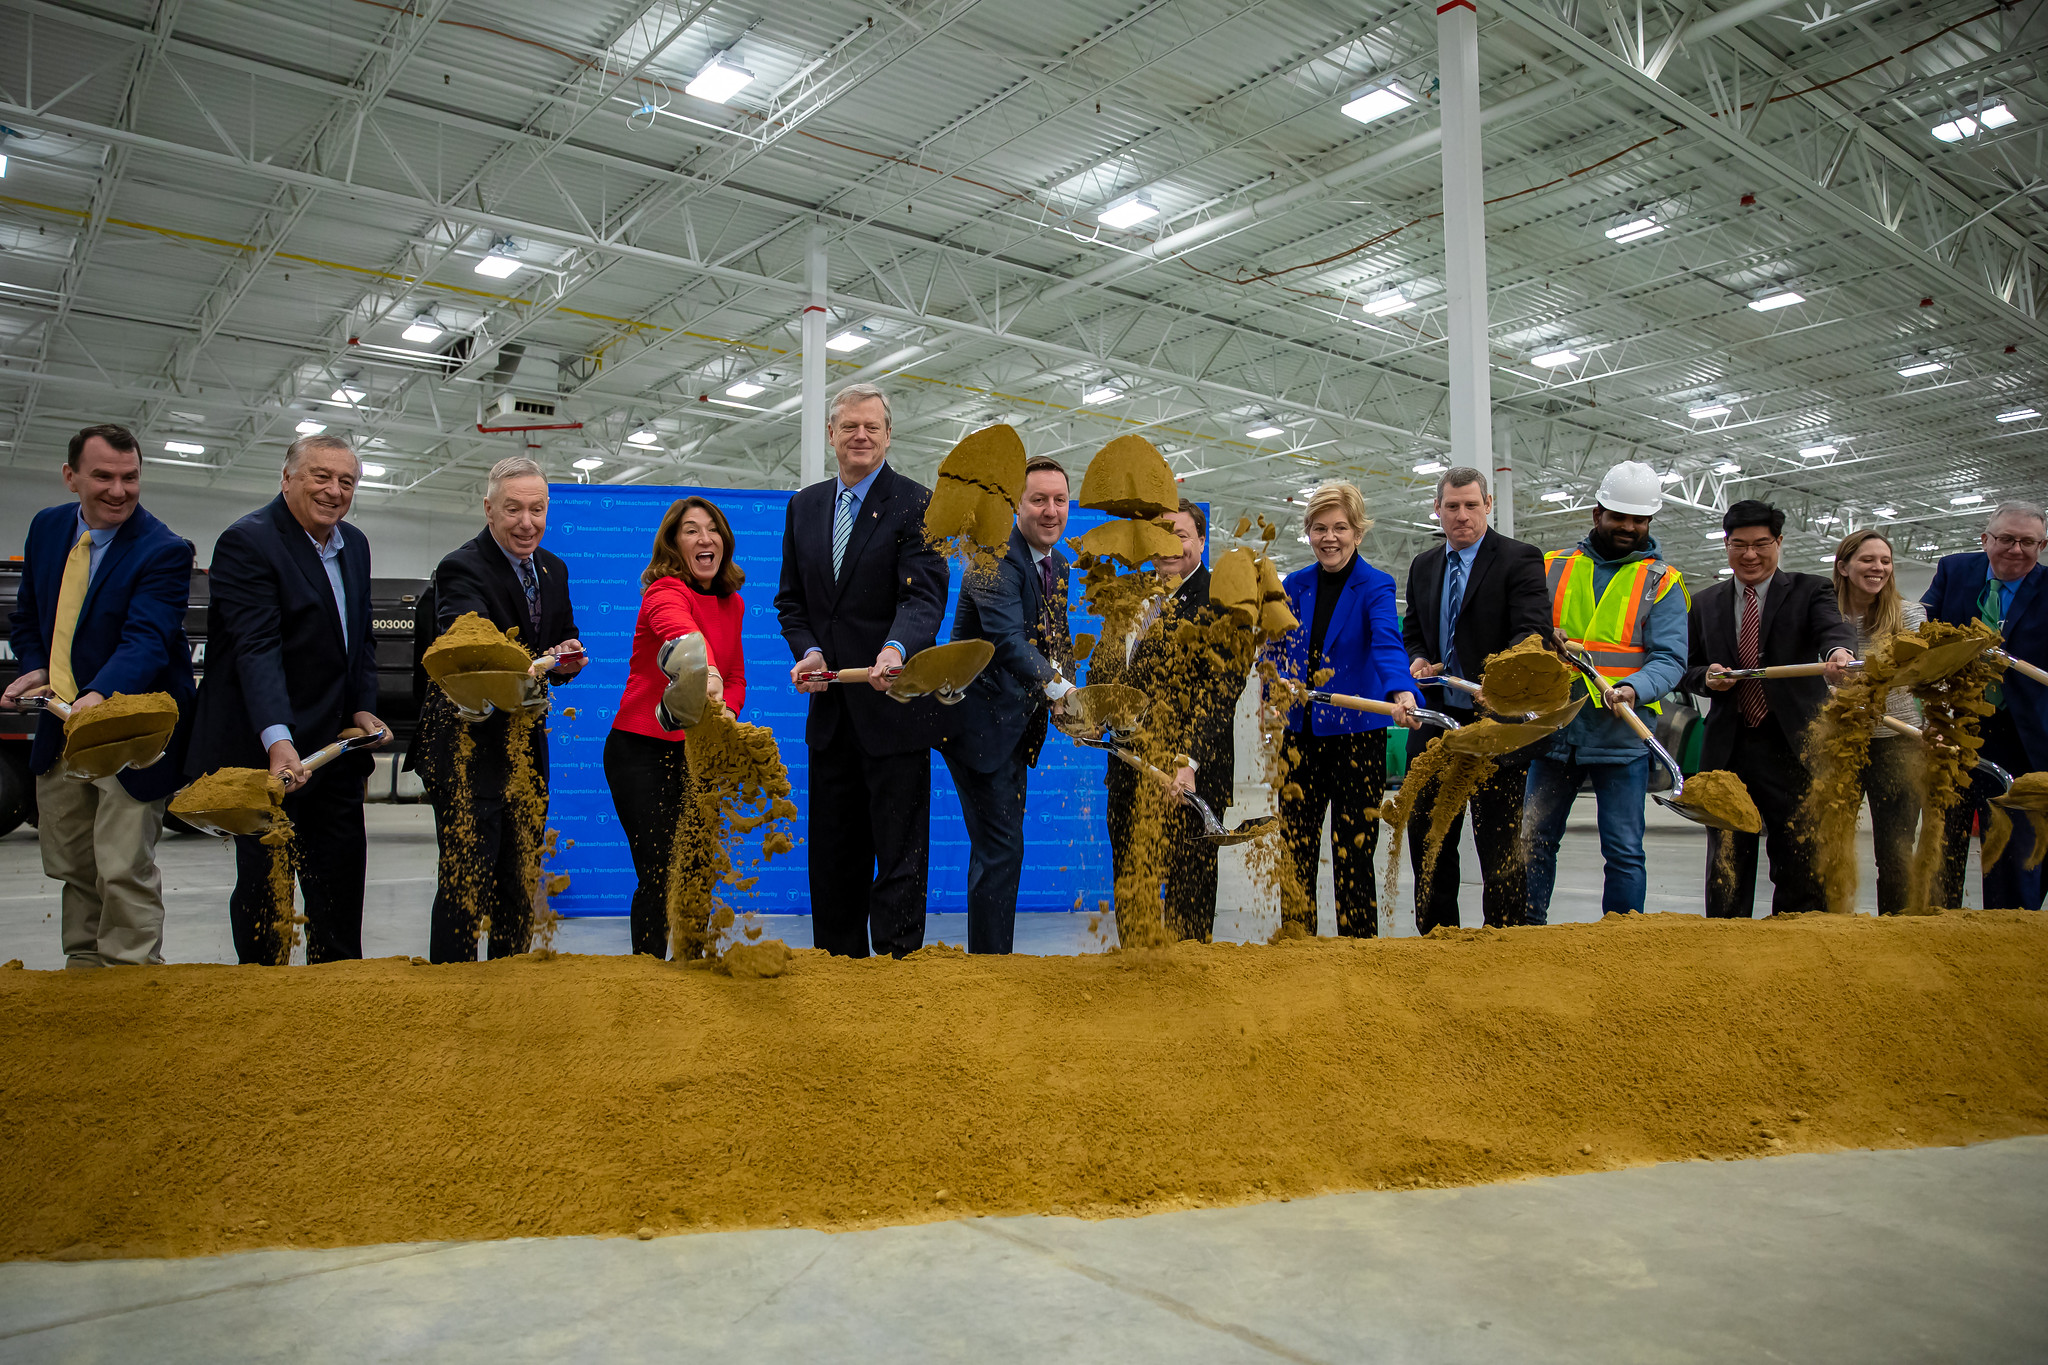 A row of men and women, most of whom are wearing business suits, toss shovelfuls of dirt into the air inside an empty warehouse building in front of a blue backdrop that's been set up for a press conference.